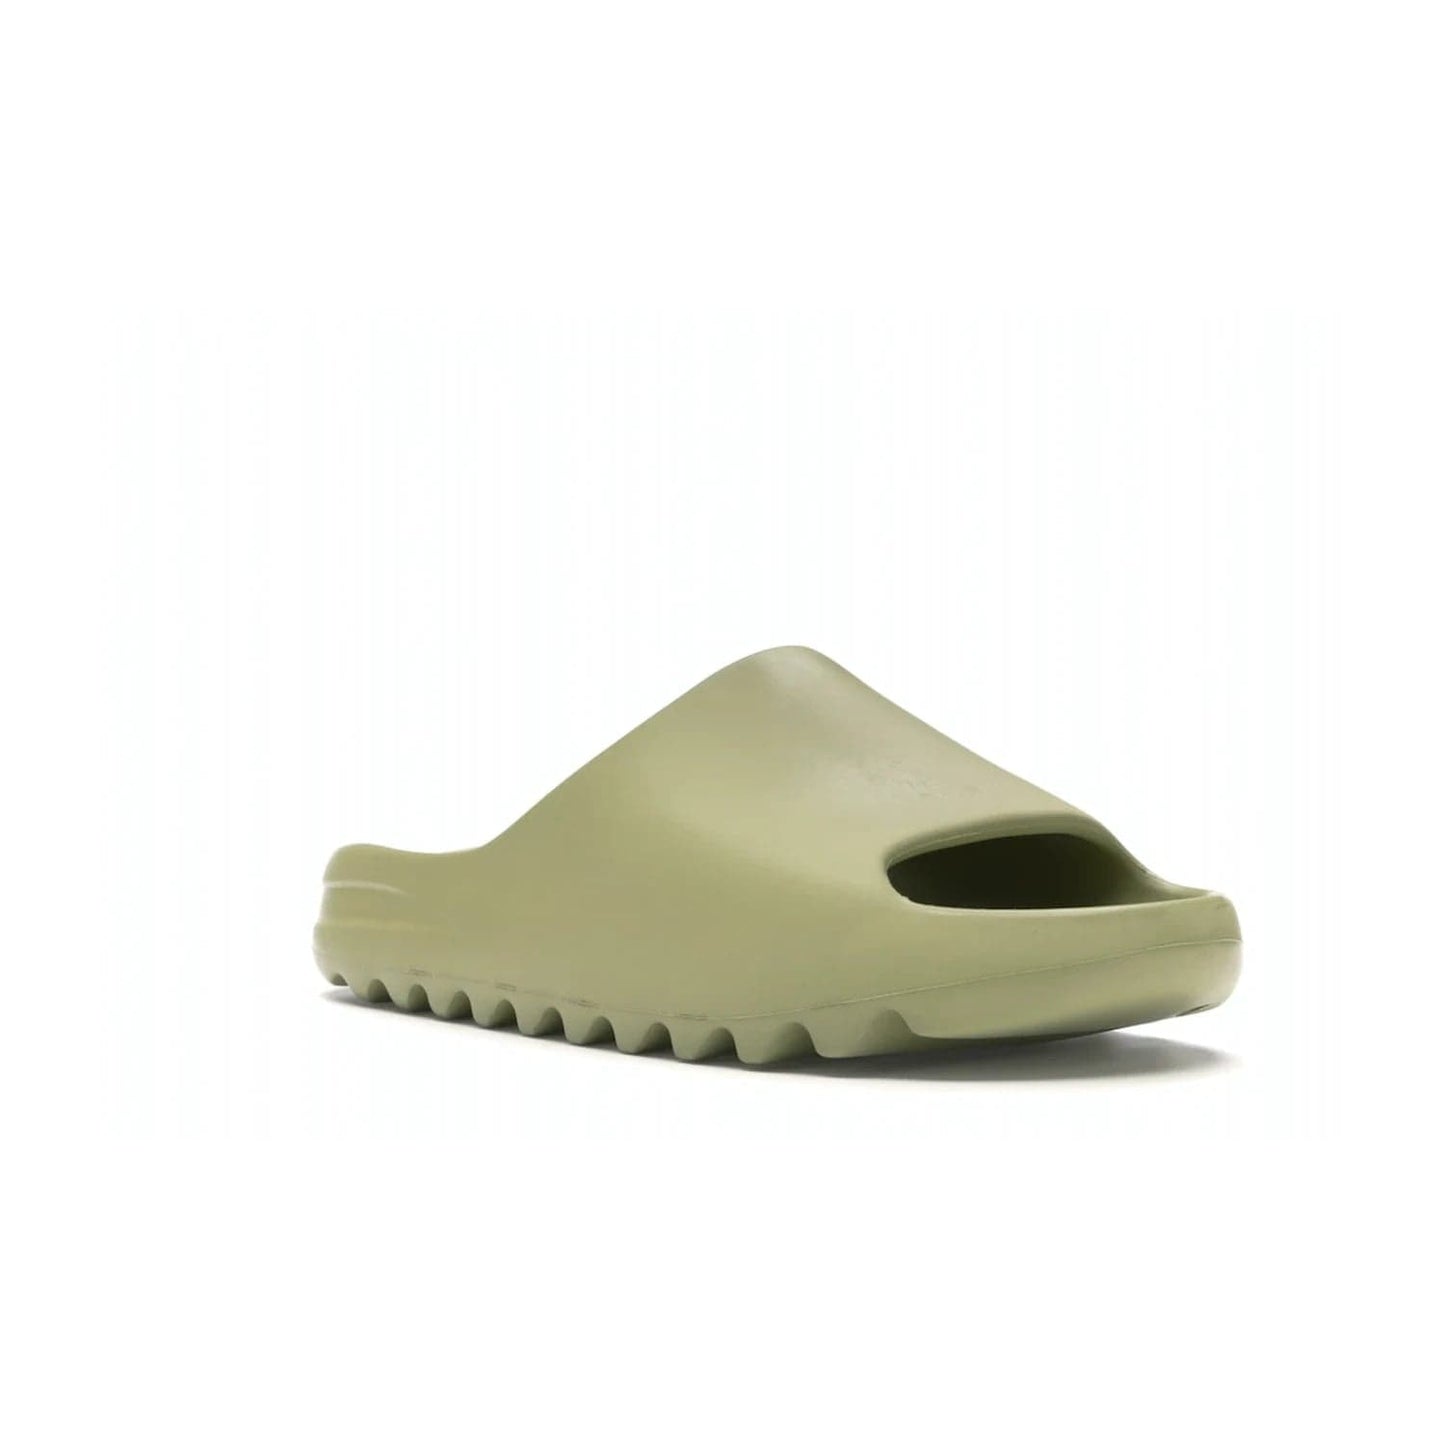 adidas Yeezy Slide Resin (2019/2021) - Image 6 - Only at www.BallersClubKickz.com - Step into fashion and function with the adidas Yeezy Slide Resin. Featuring a lightweight Resin EVA foam construction and an outsole with accentuated grooves for traction and support. The latest release is available in a Resin/Resin/Resin colorway, combining modern aesthetics and classic style. Step into style with the adidas Yeezy Slide Resin and be the trend-setter this season.